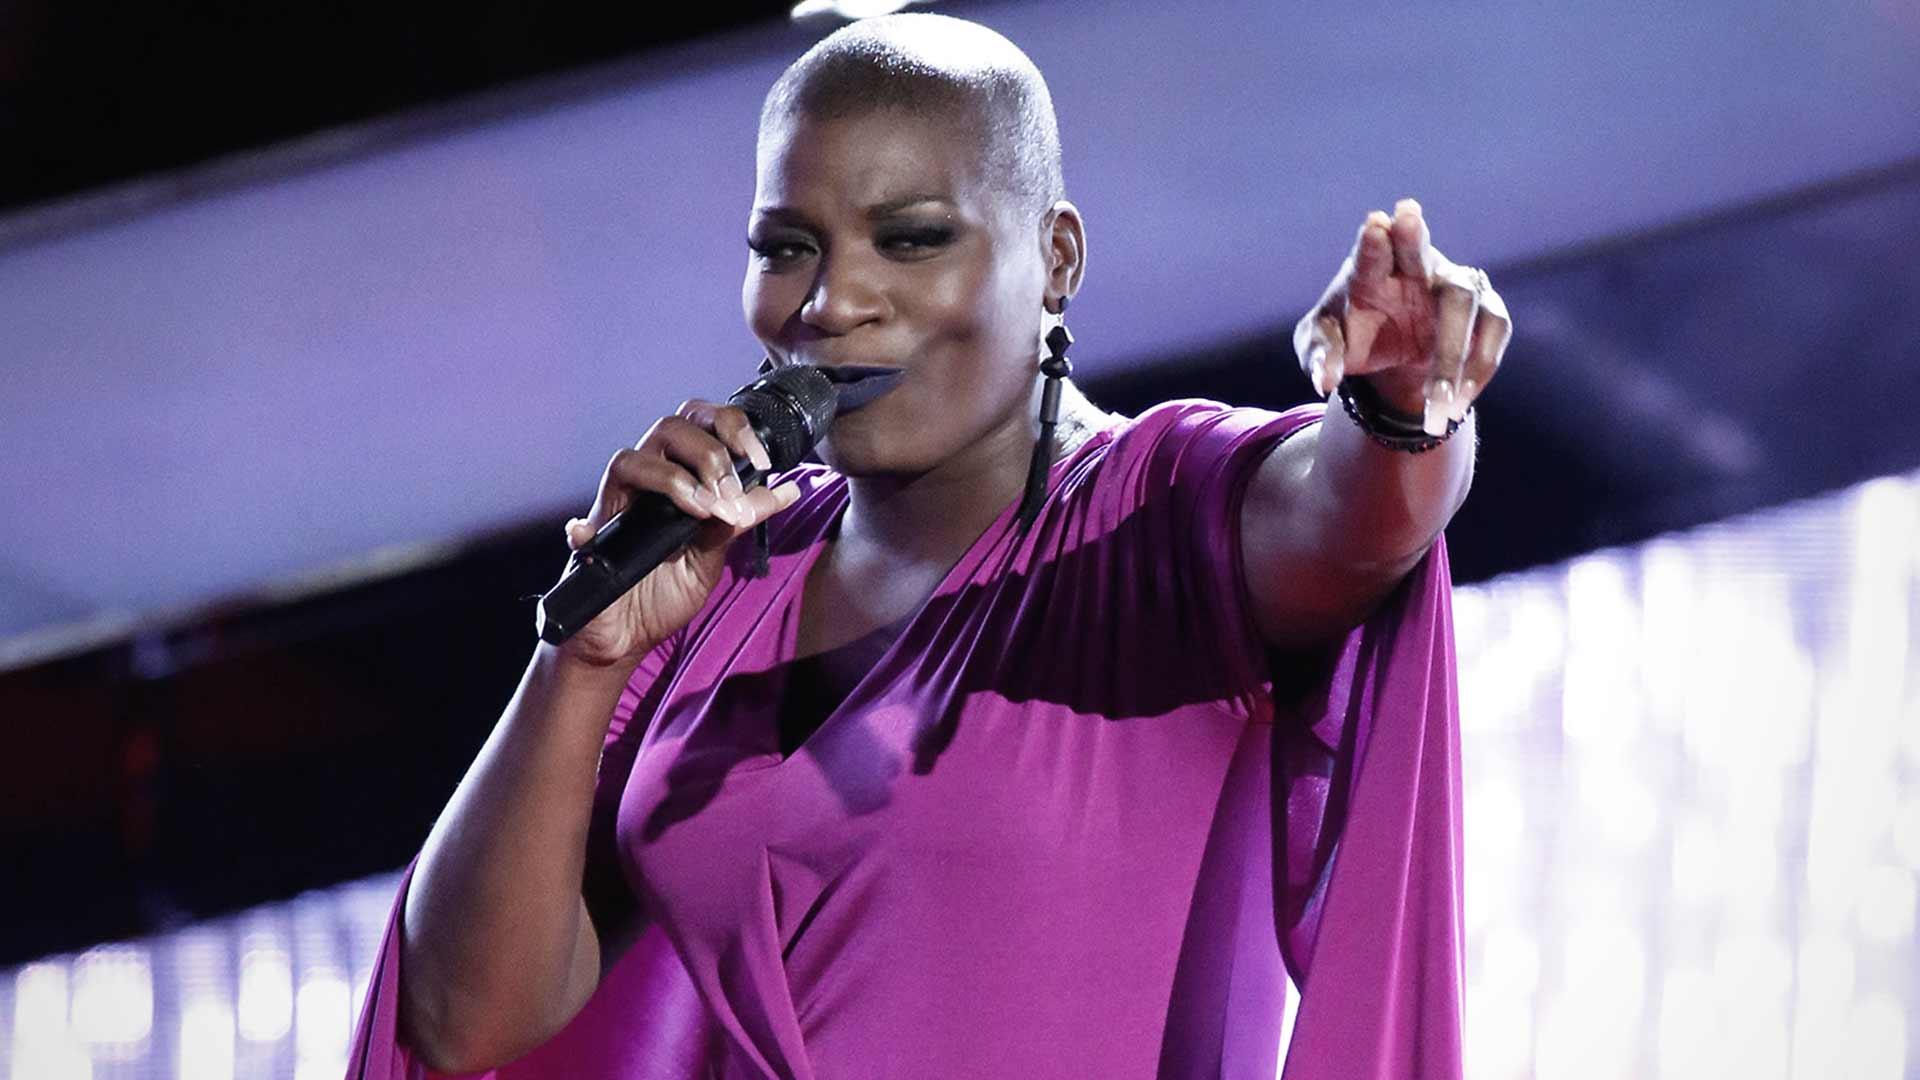 ‘The Voice’ Star Janice Freeman’s Death Certificate Confirms She Died of a Pulmonary Embolism